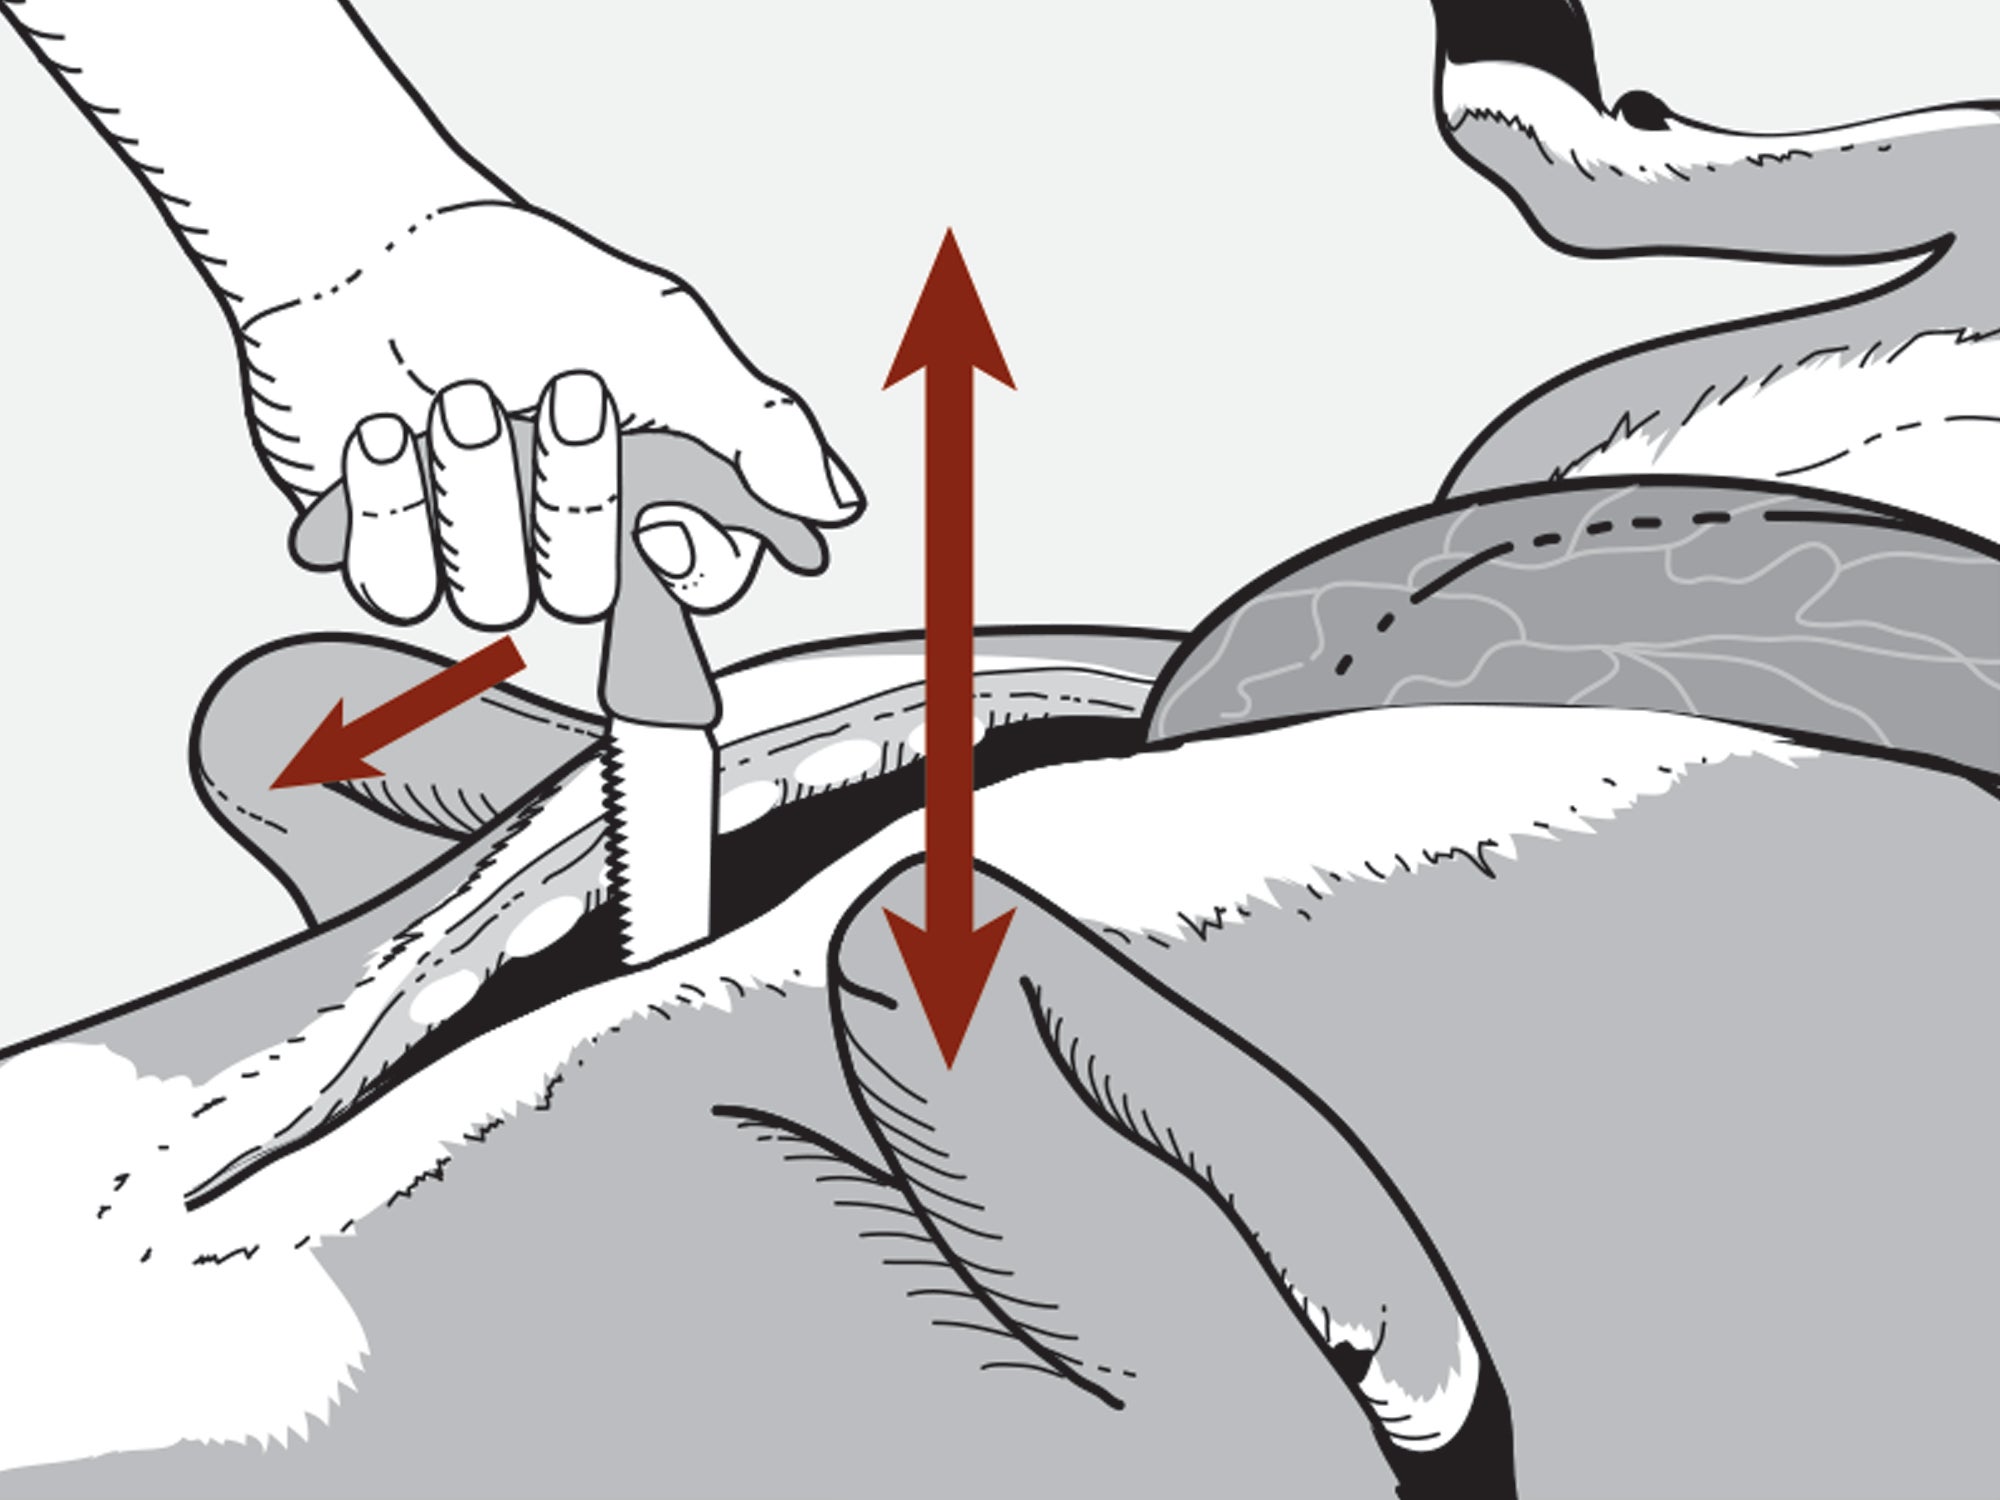 how to open the chest cavity on a deer